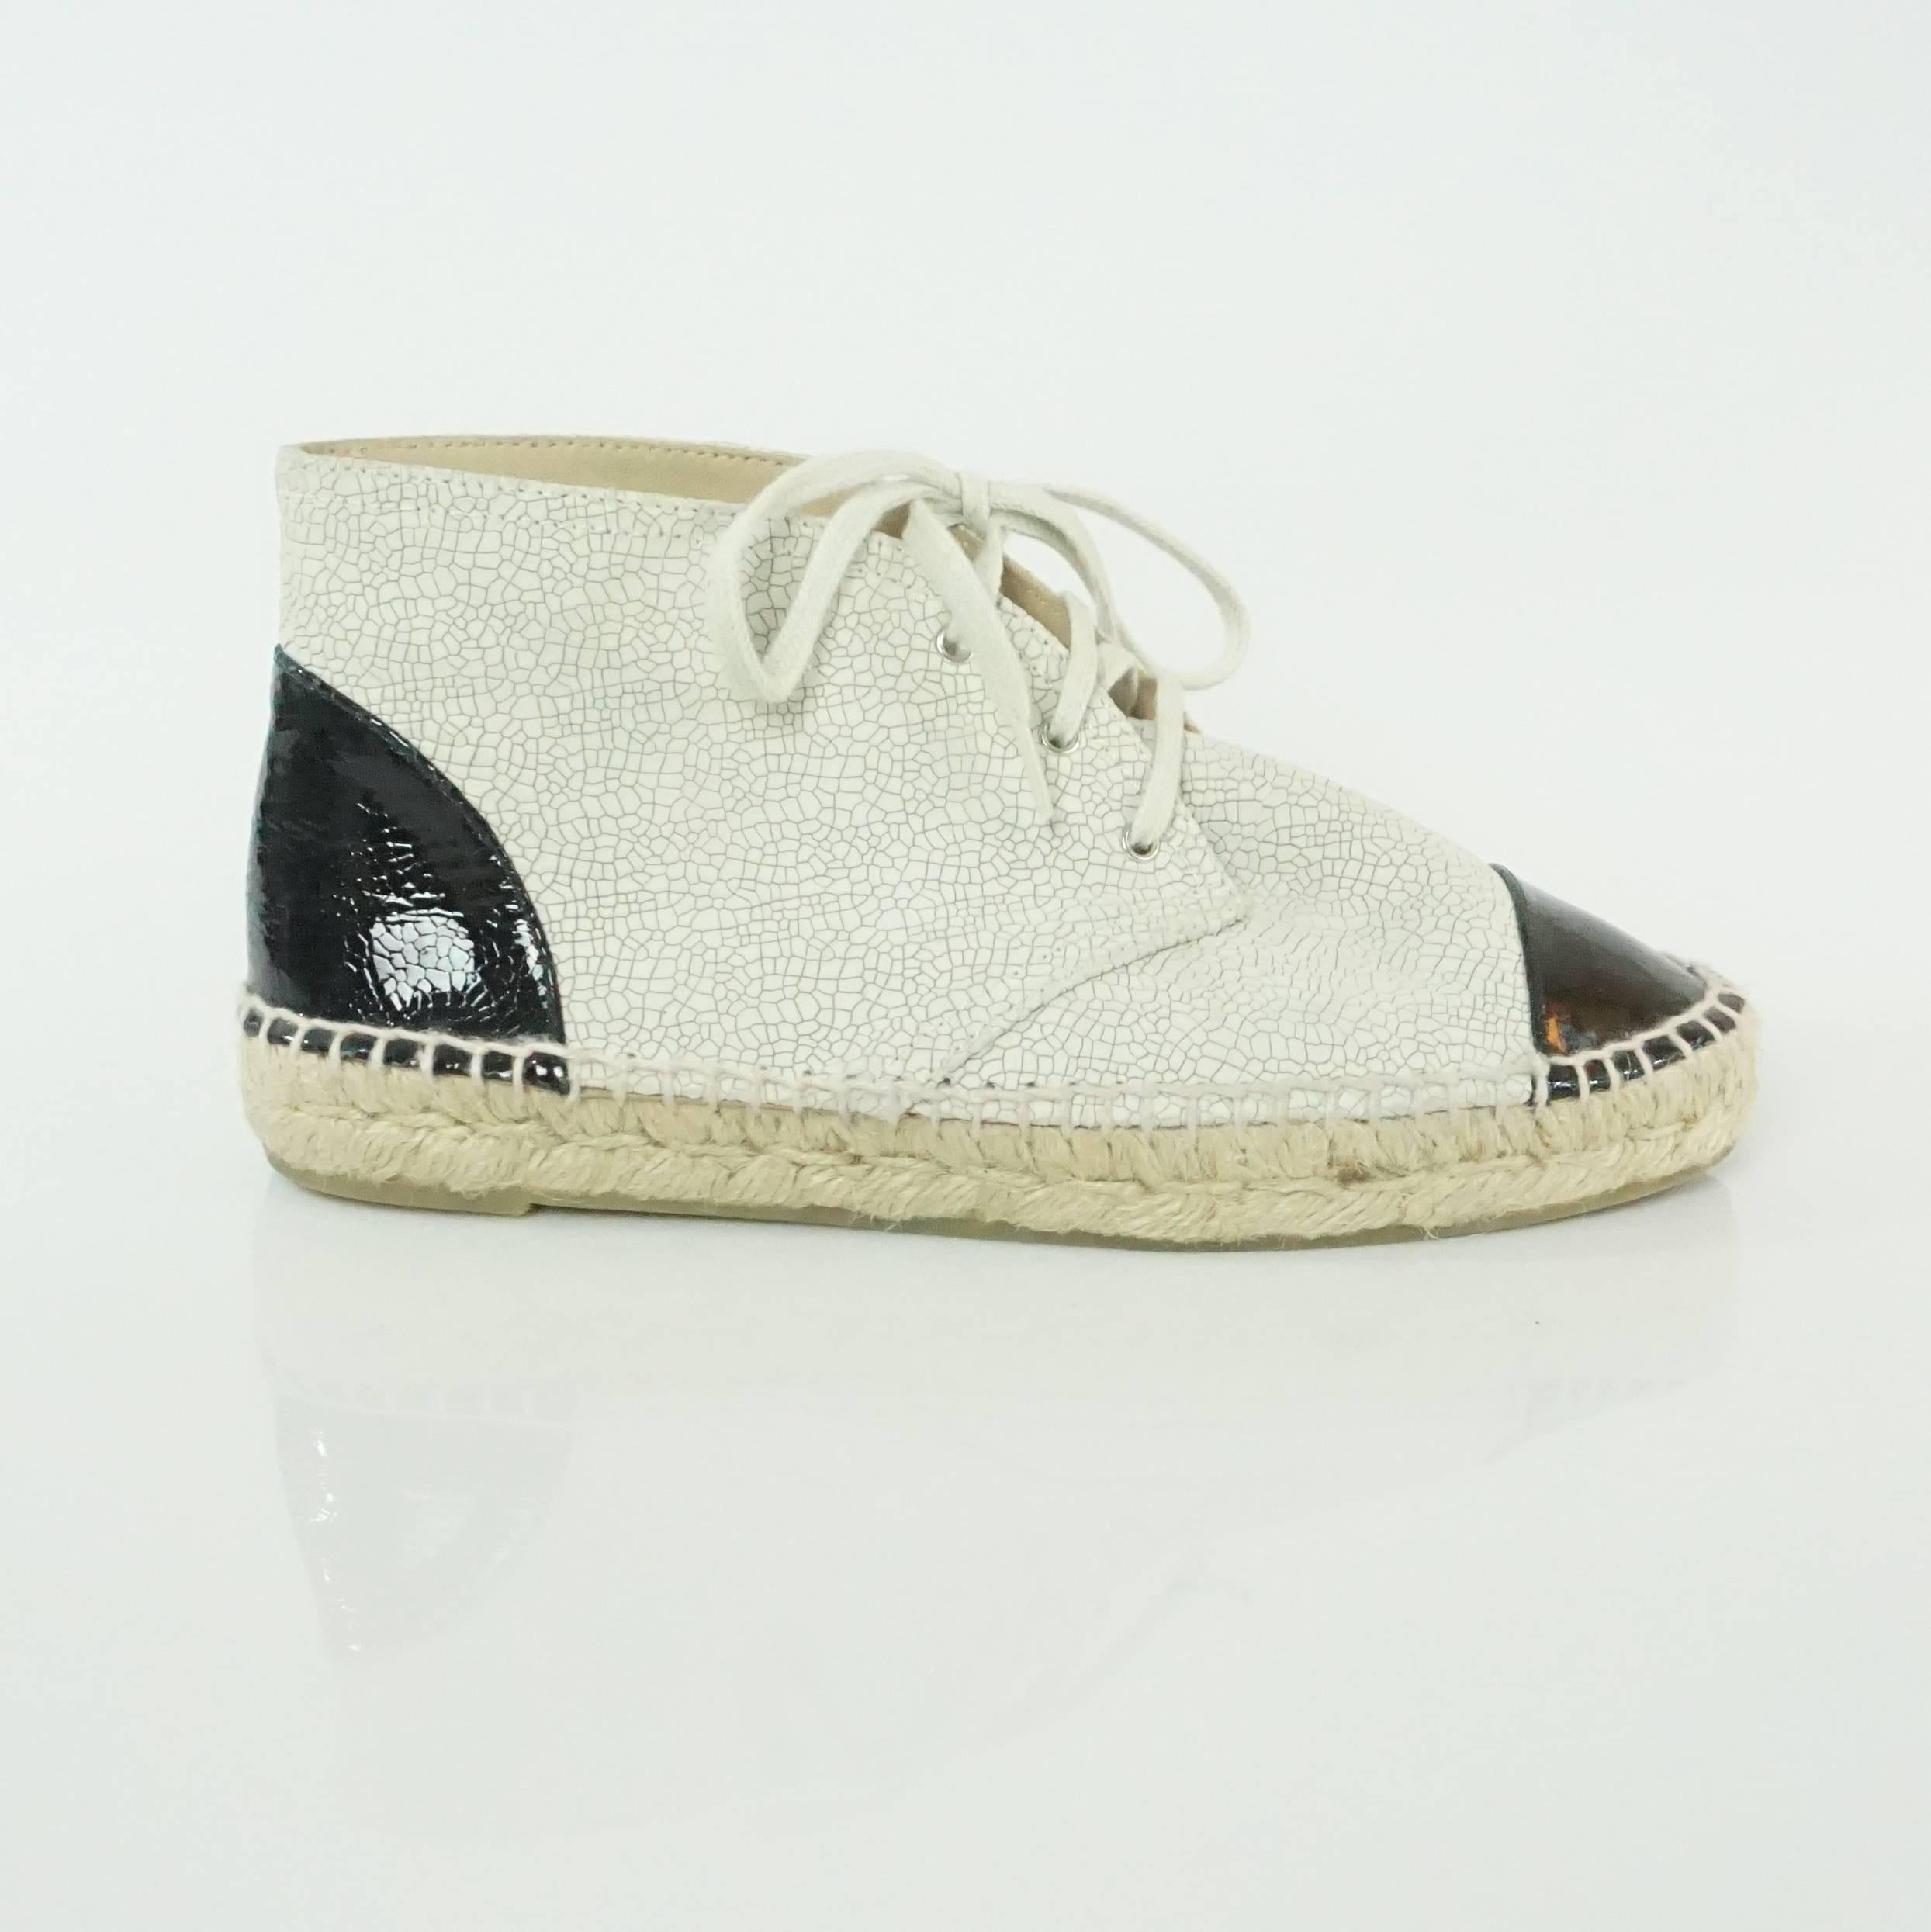 Chanel Beige and Black Cracked Patent High Top Espadrille Sneakers - 38. These shoes are in excellent condition with very light wear. Both the beige regular leather and the patent are cracked and the sneakers are a lace-up style. 

